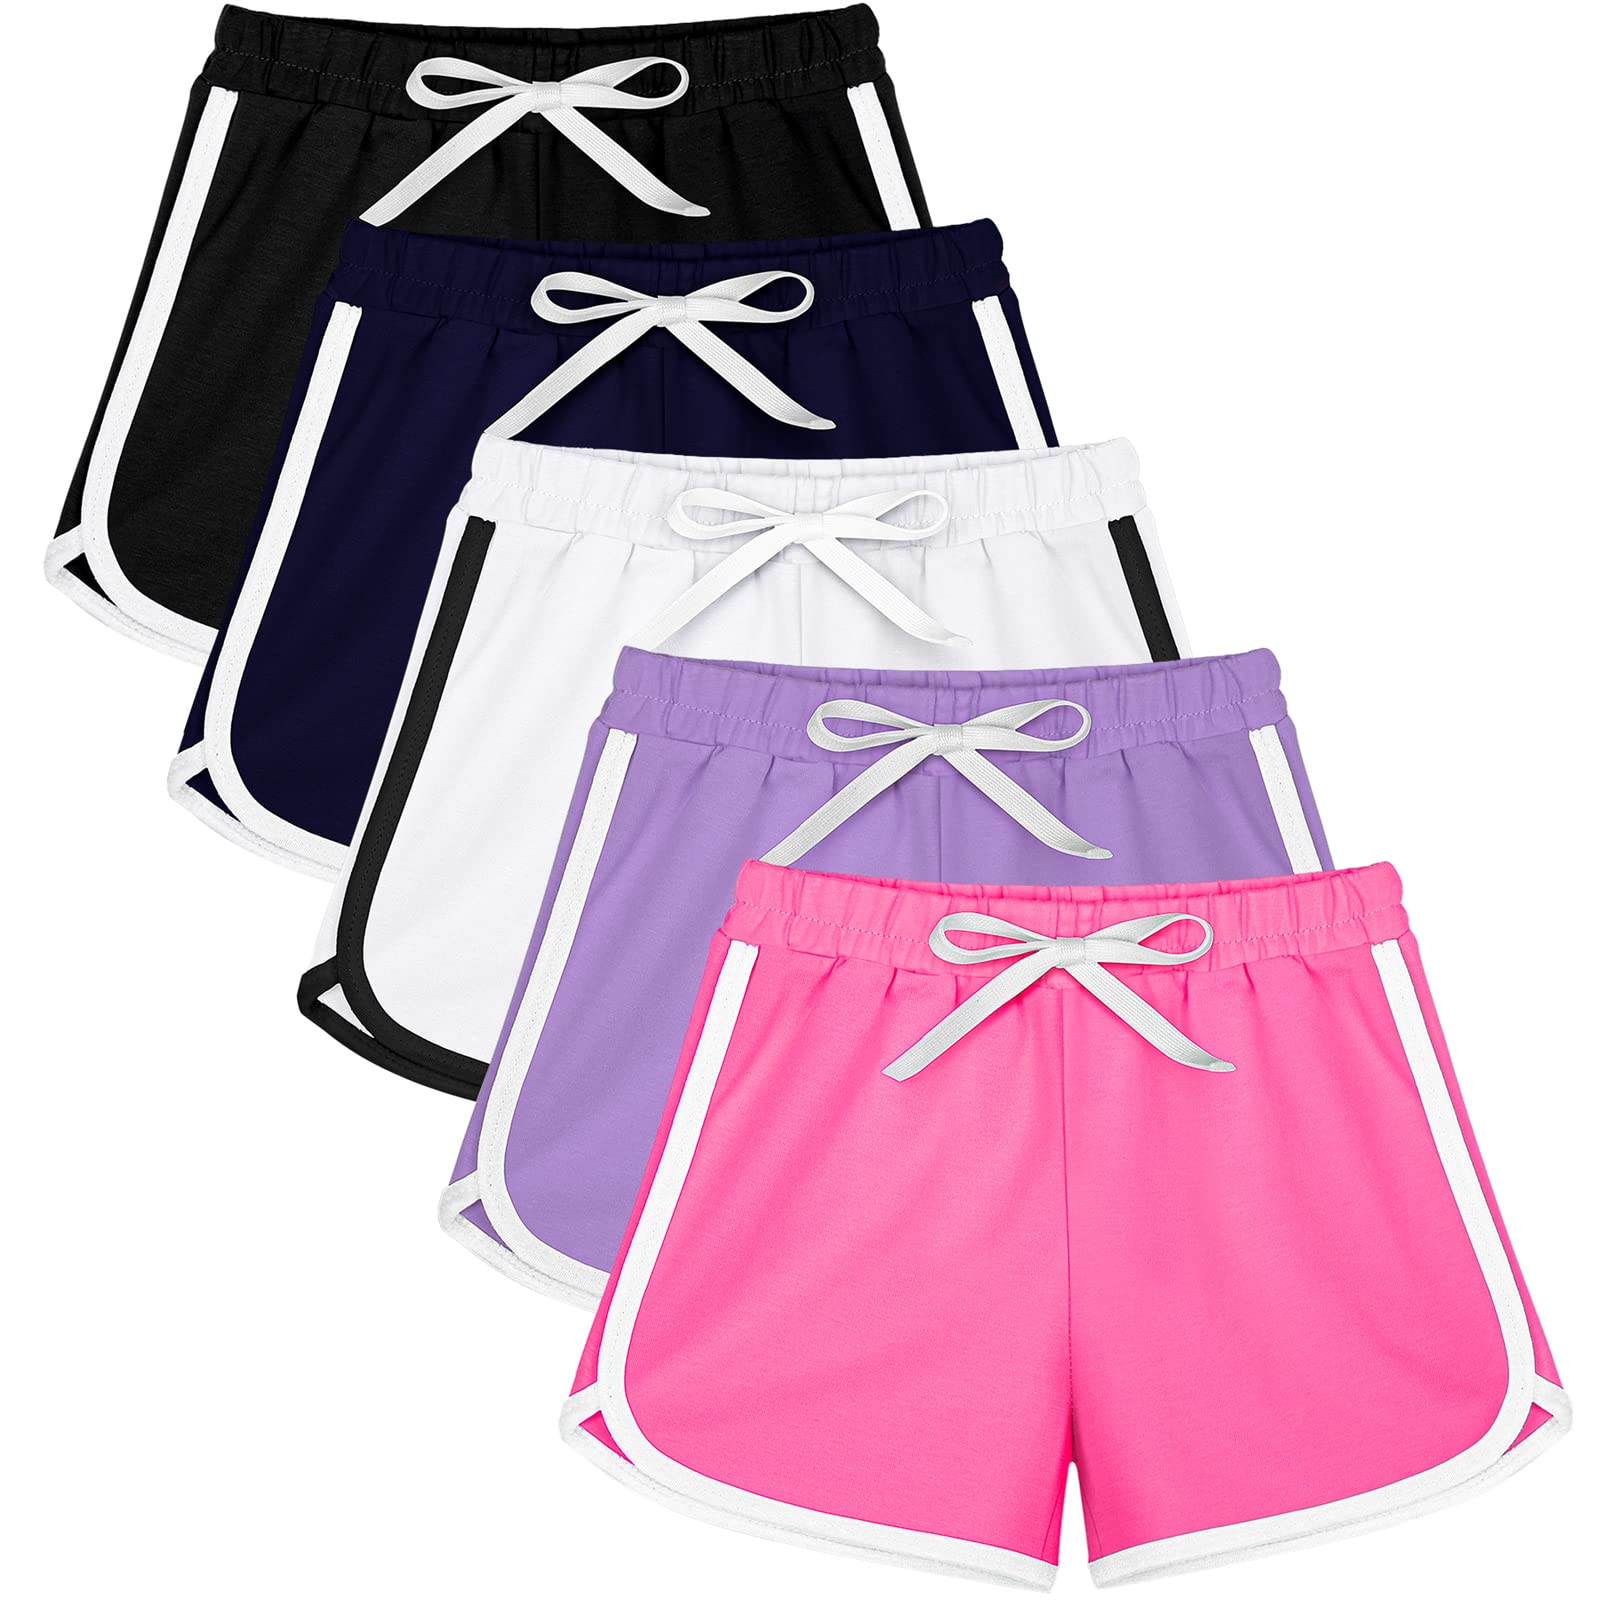 Resinta 5 Packs Girls Running Shorts Quick Dry Active Shorts Polyester Kids Athletic  Shorts Workout Dolphin Shorts 10-12 Years Black light Gray pink hot Pink  turquoise